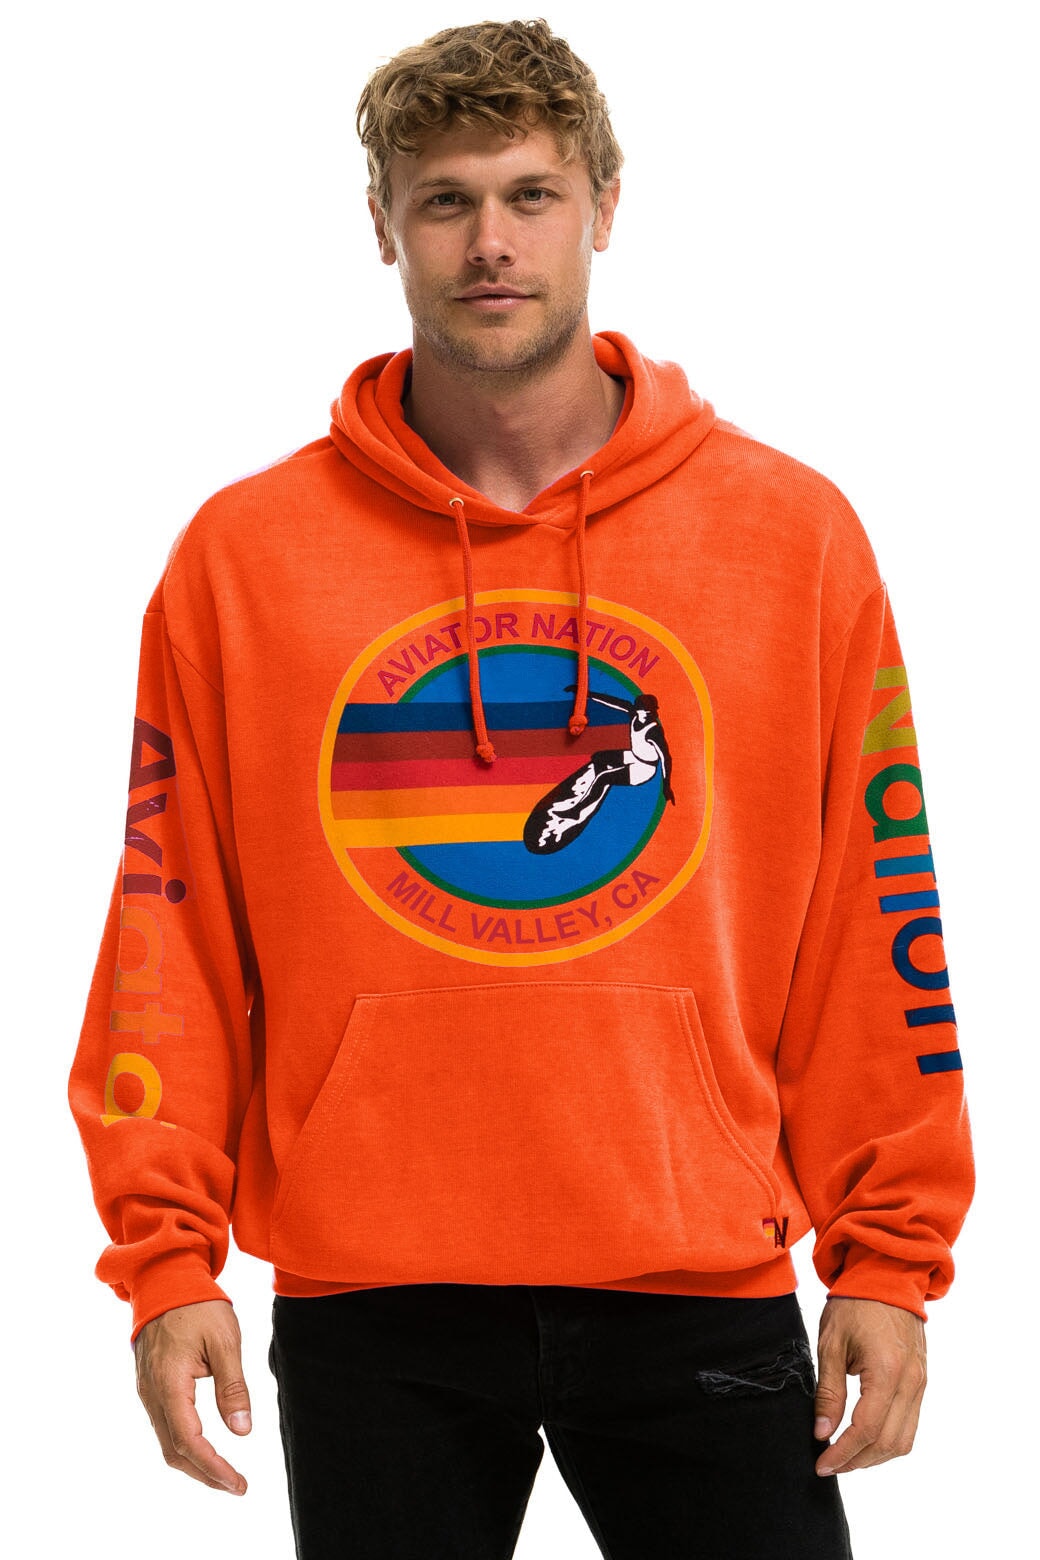 AVIATOR NATION MILL VALLEY RELAXED PULLOVER HOODIE - ORANGE Hoodie Aviator Nation 